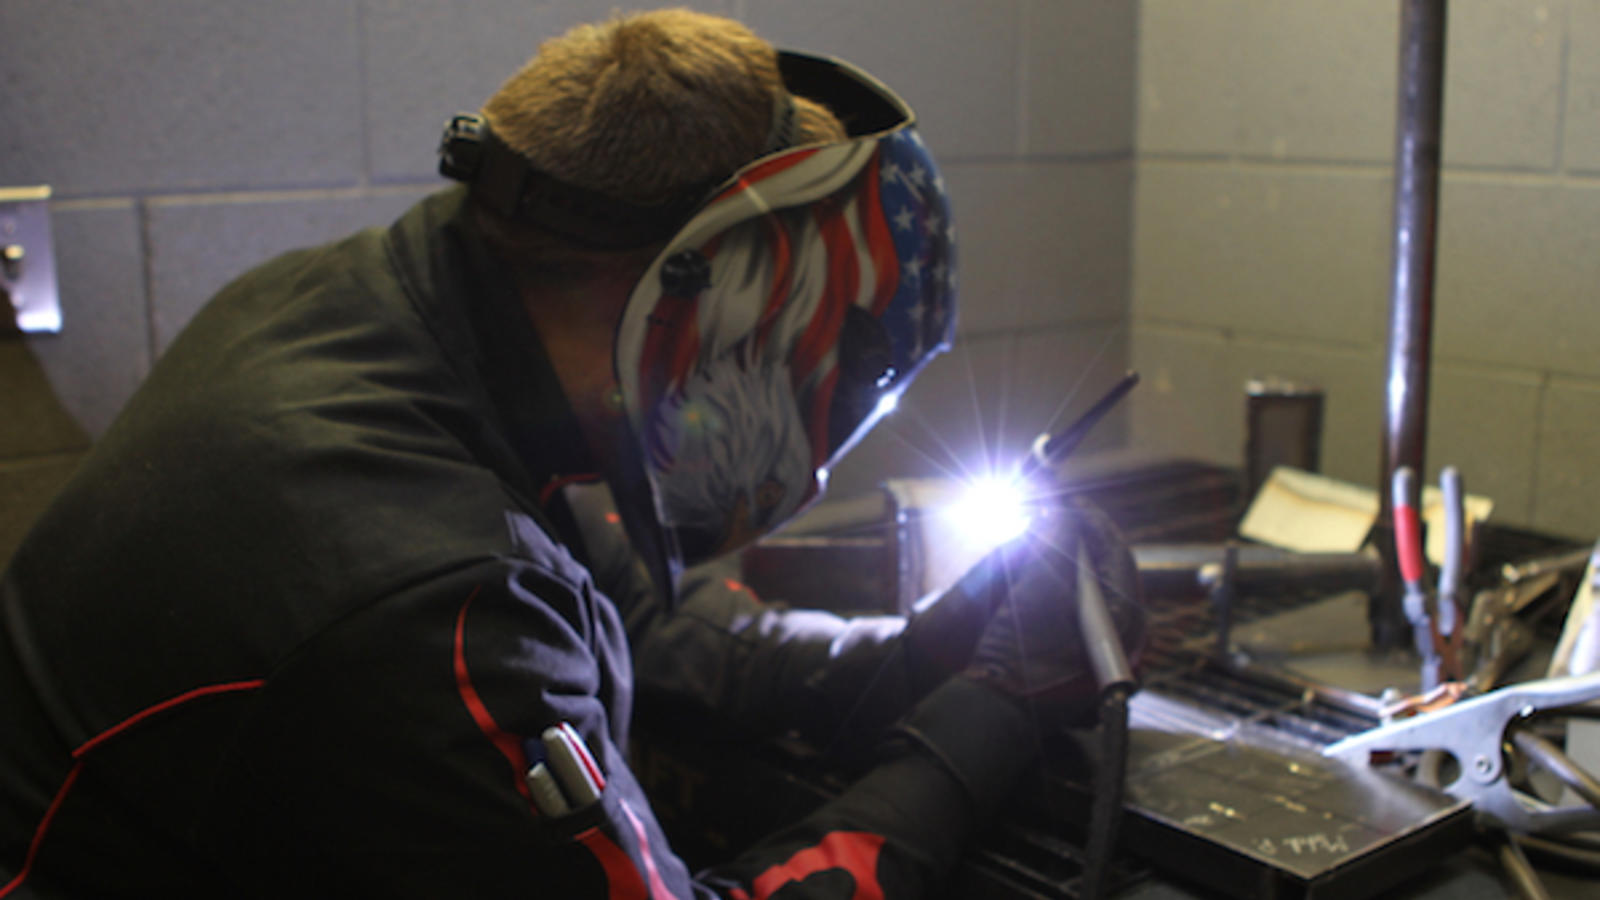 Arc Welding A Project Piece at the Lincoln's Denver Welding School